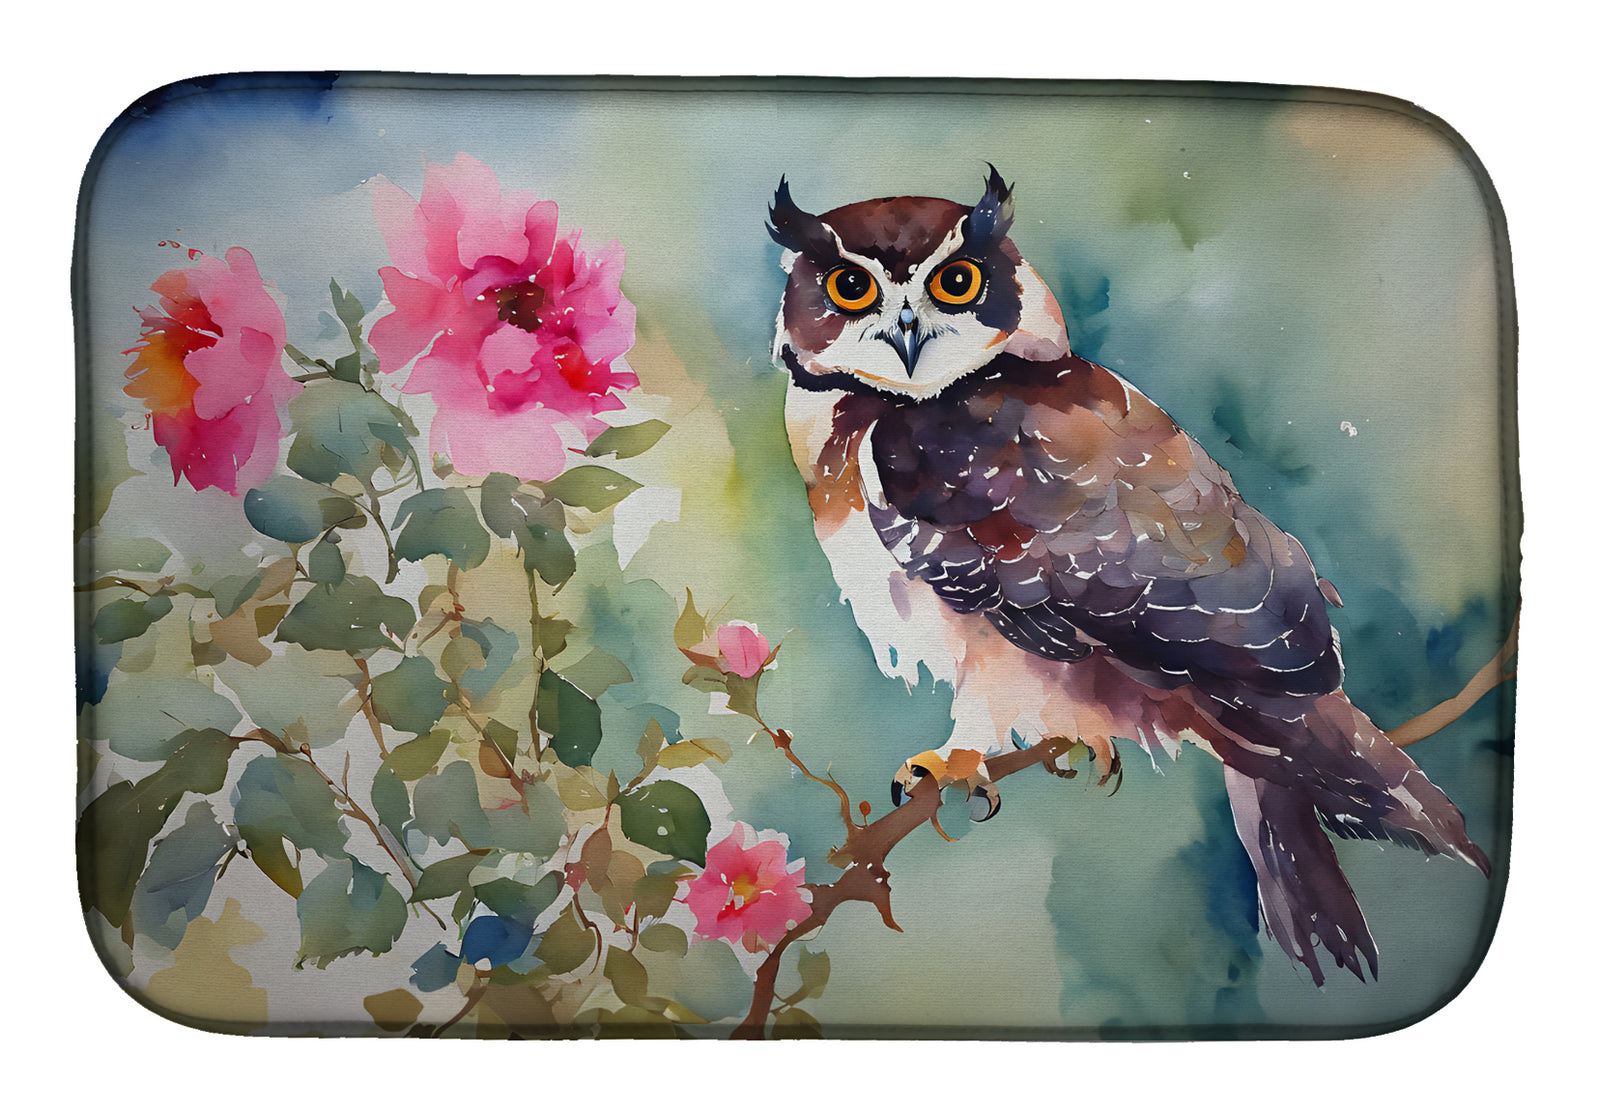 Buy this Spectacled Owl Dish Drying Mat